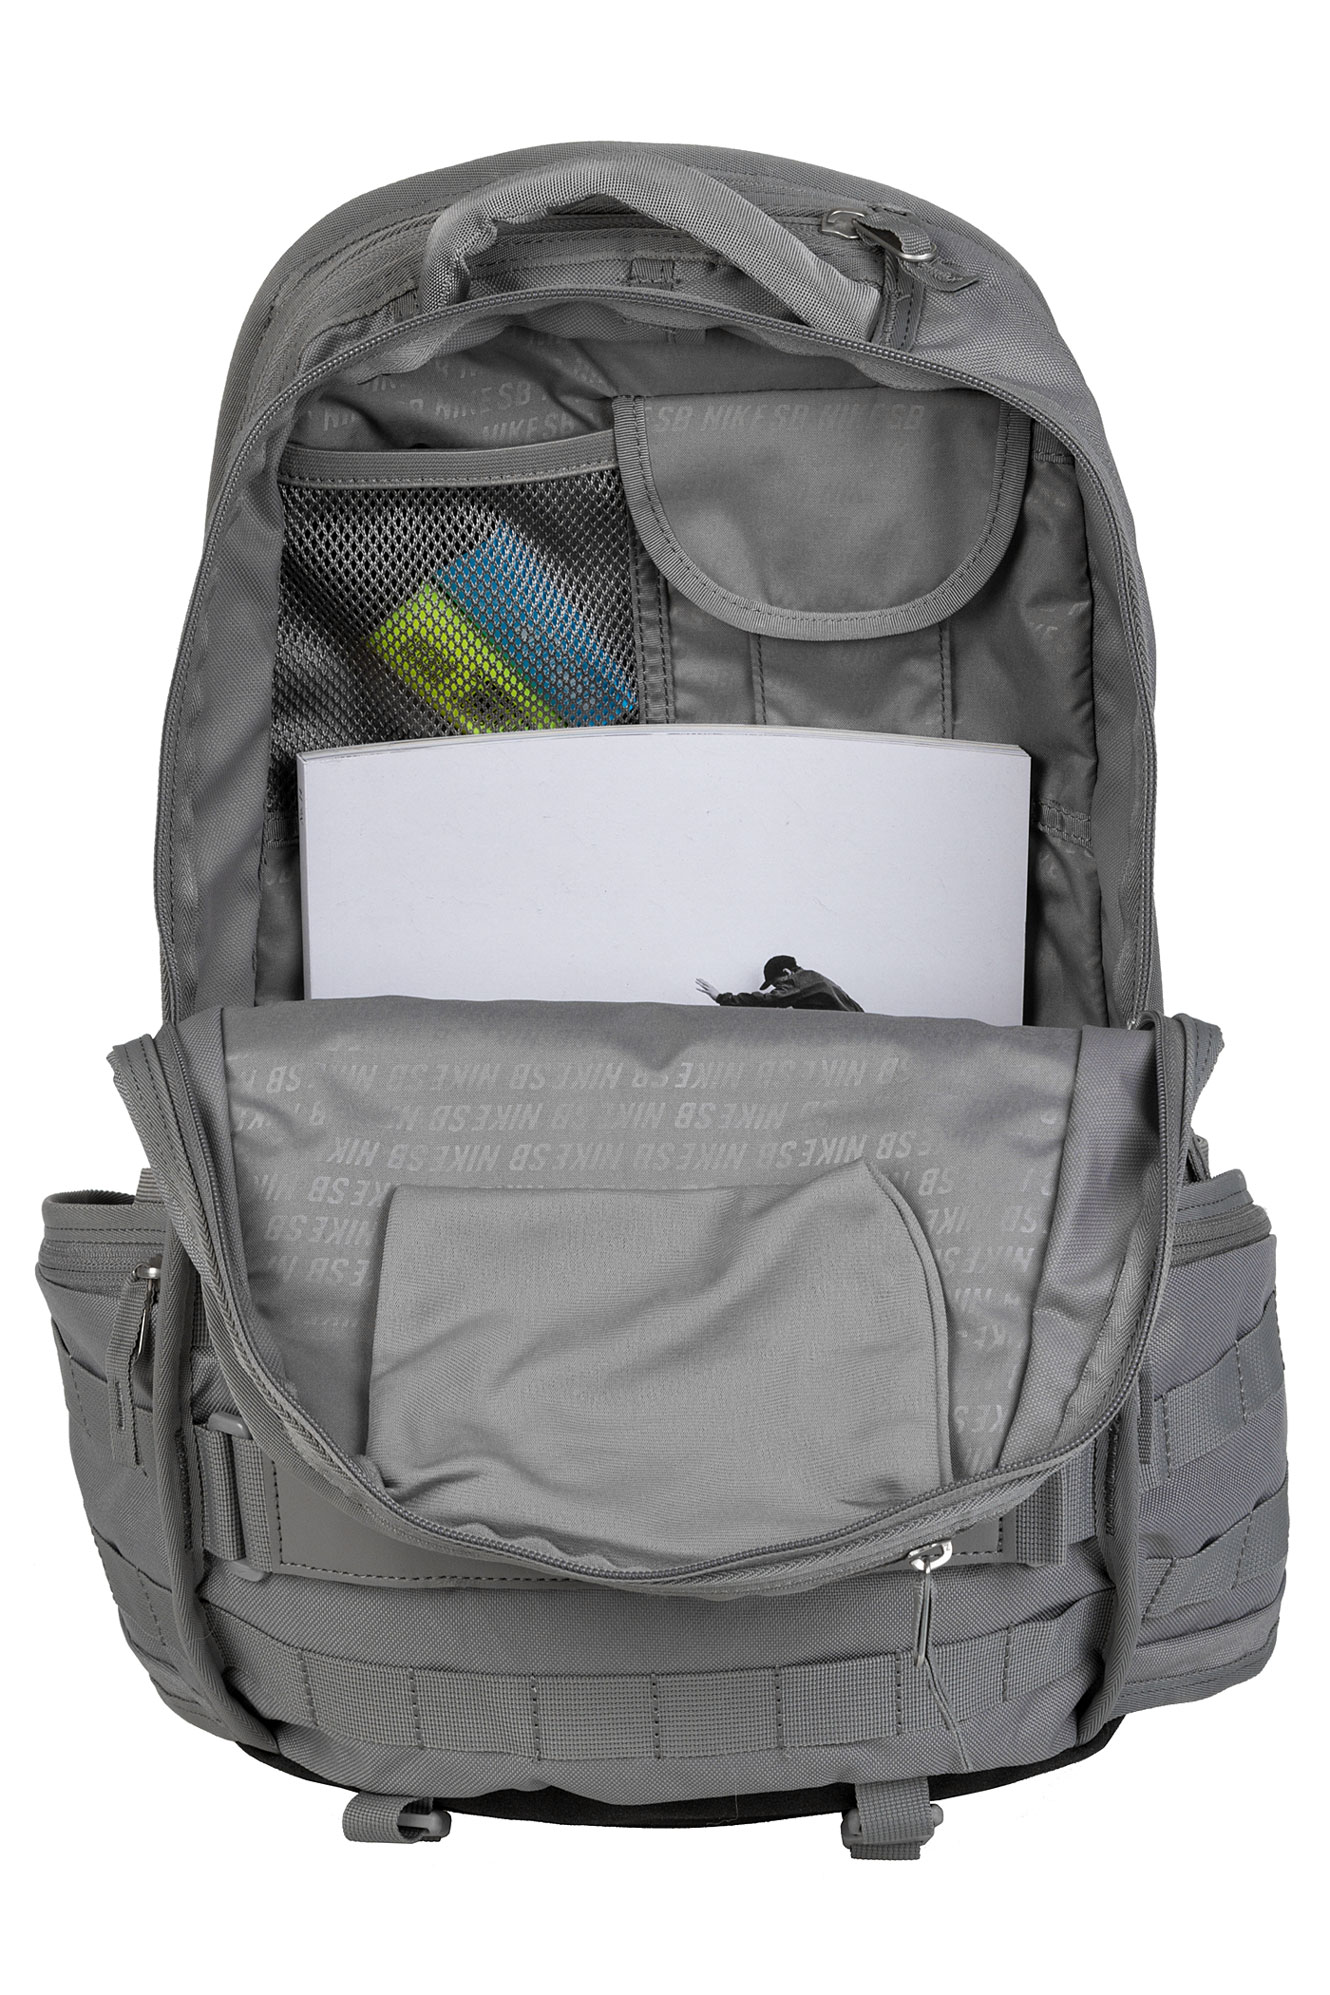 Nike Sb Rpm Backpack For Sale Cheap Up To 79 Discounts